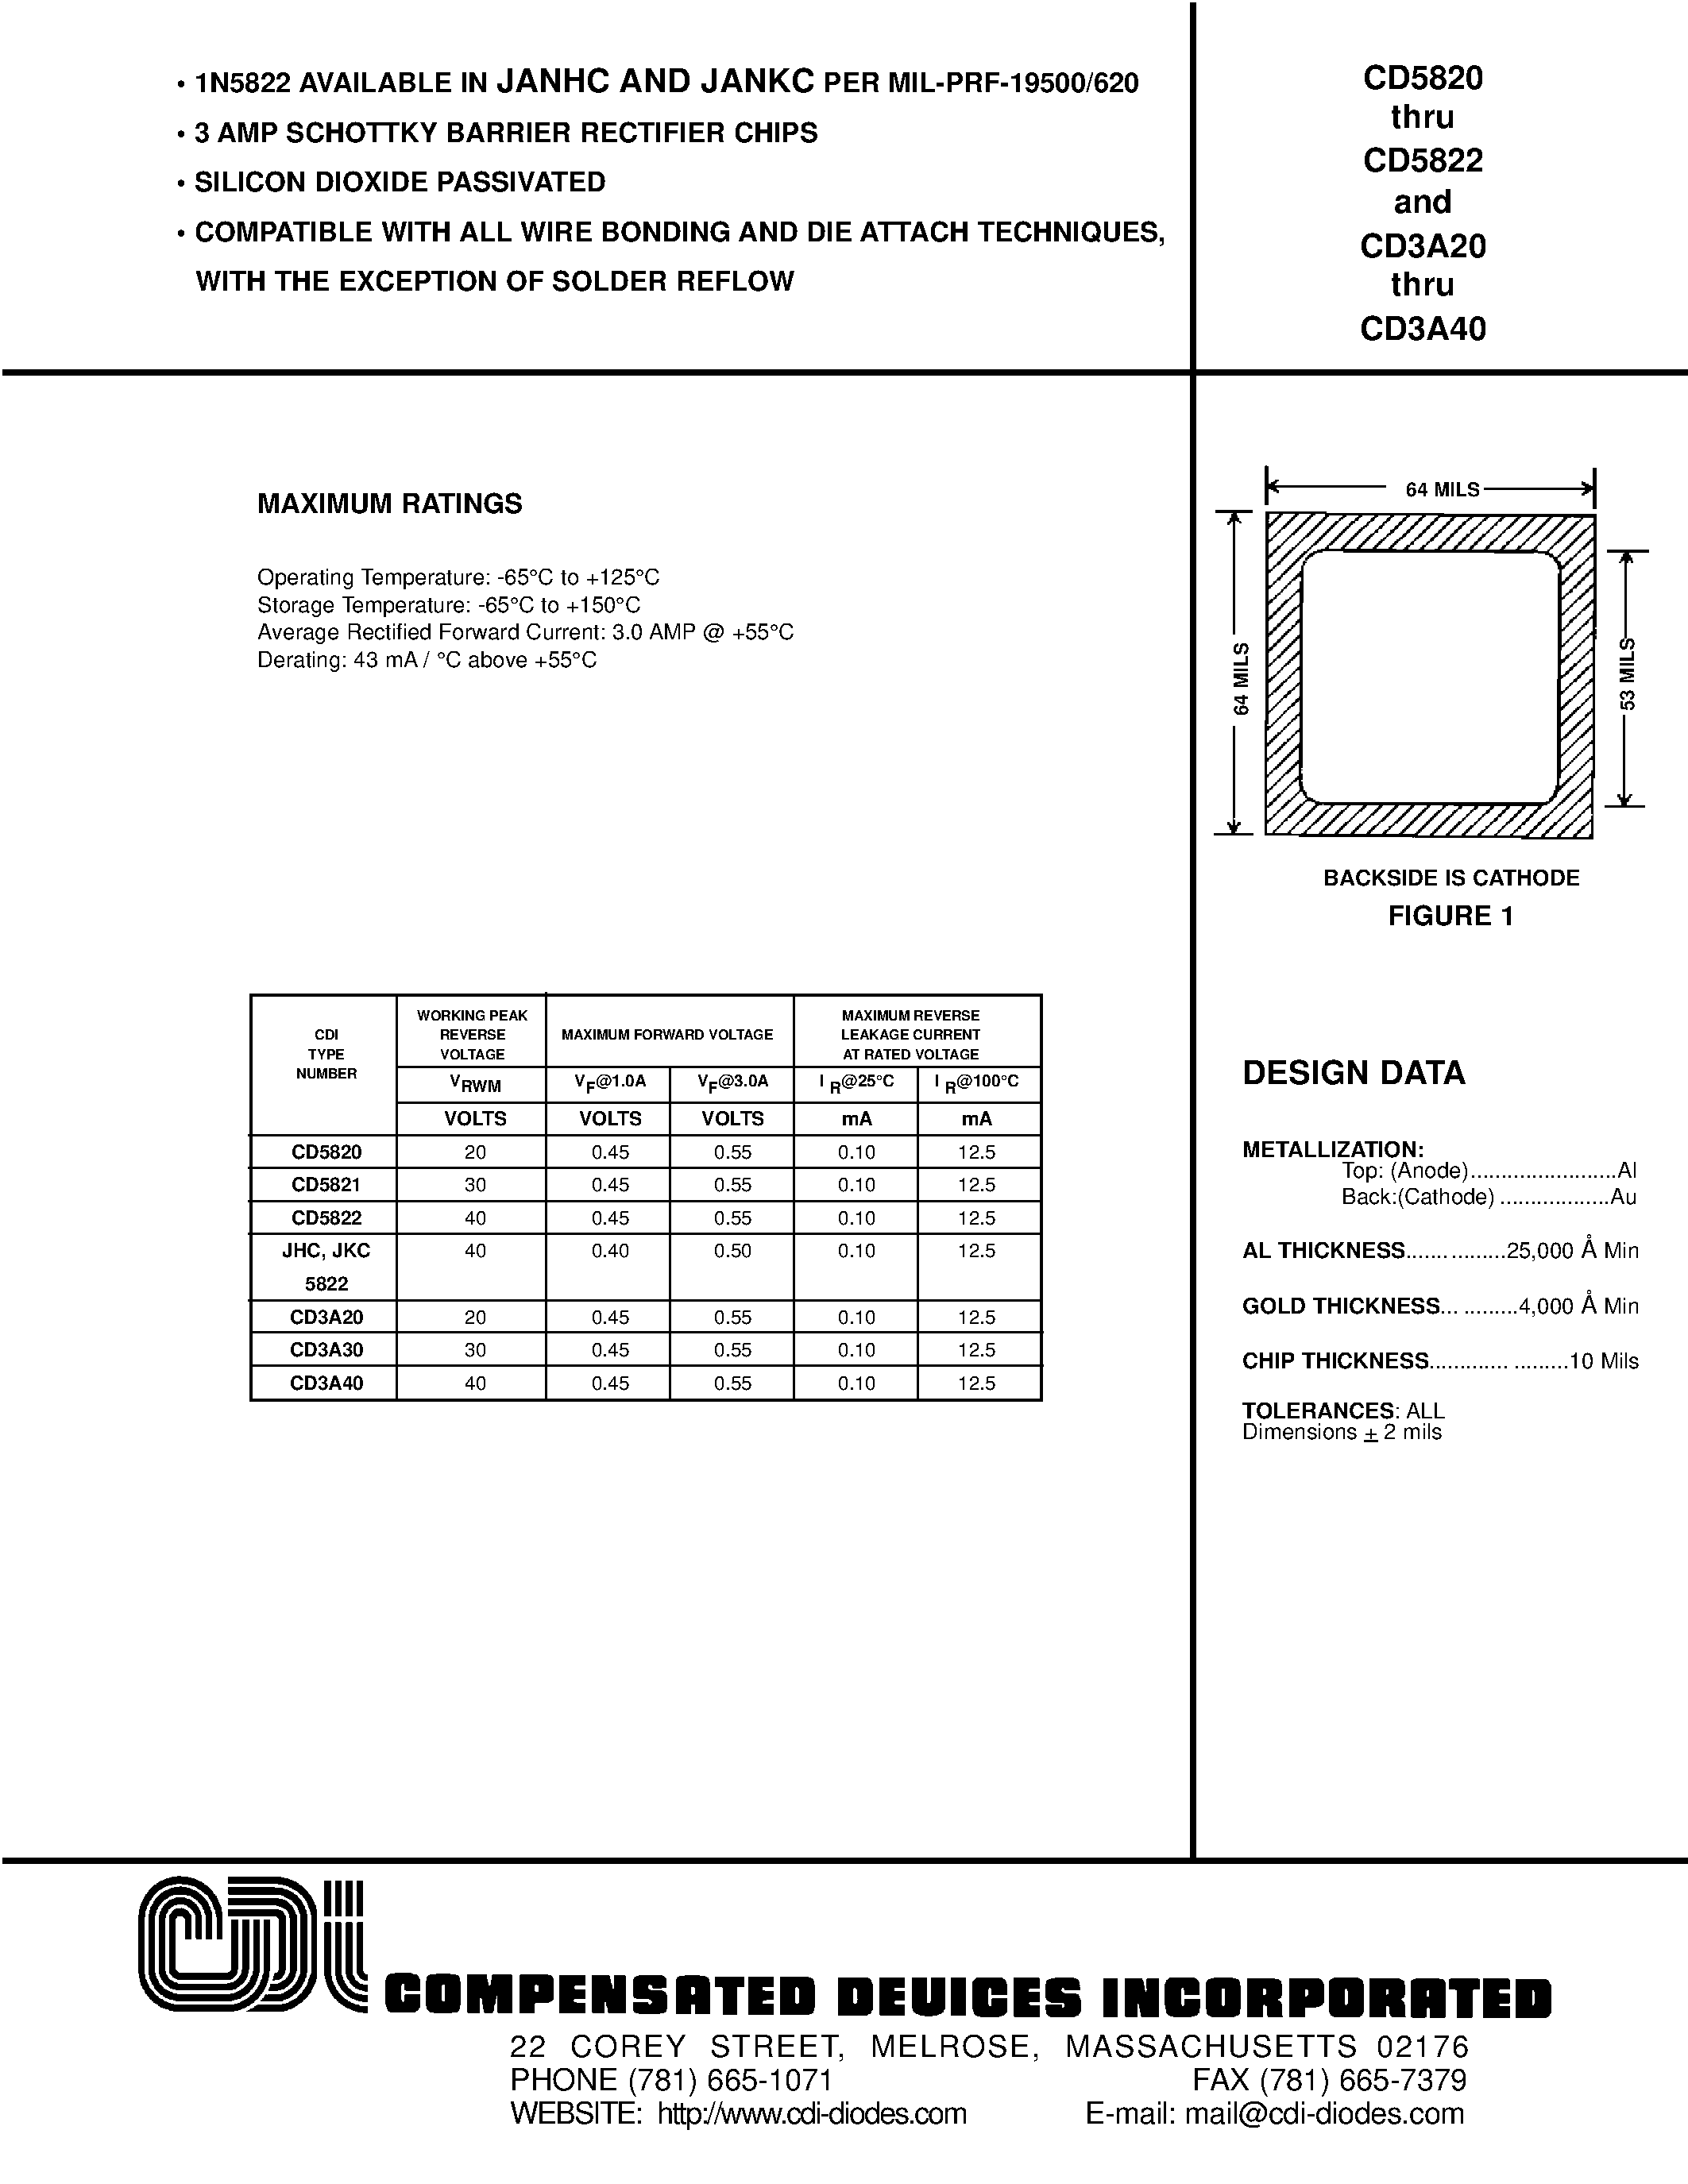 Datasheet CD3A40 - SILICON DIOXIDE PASSIVATED page 1